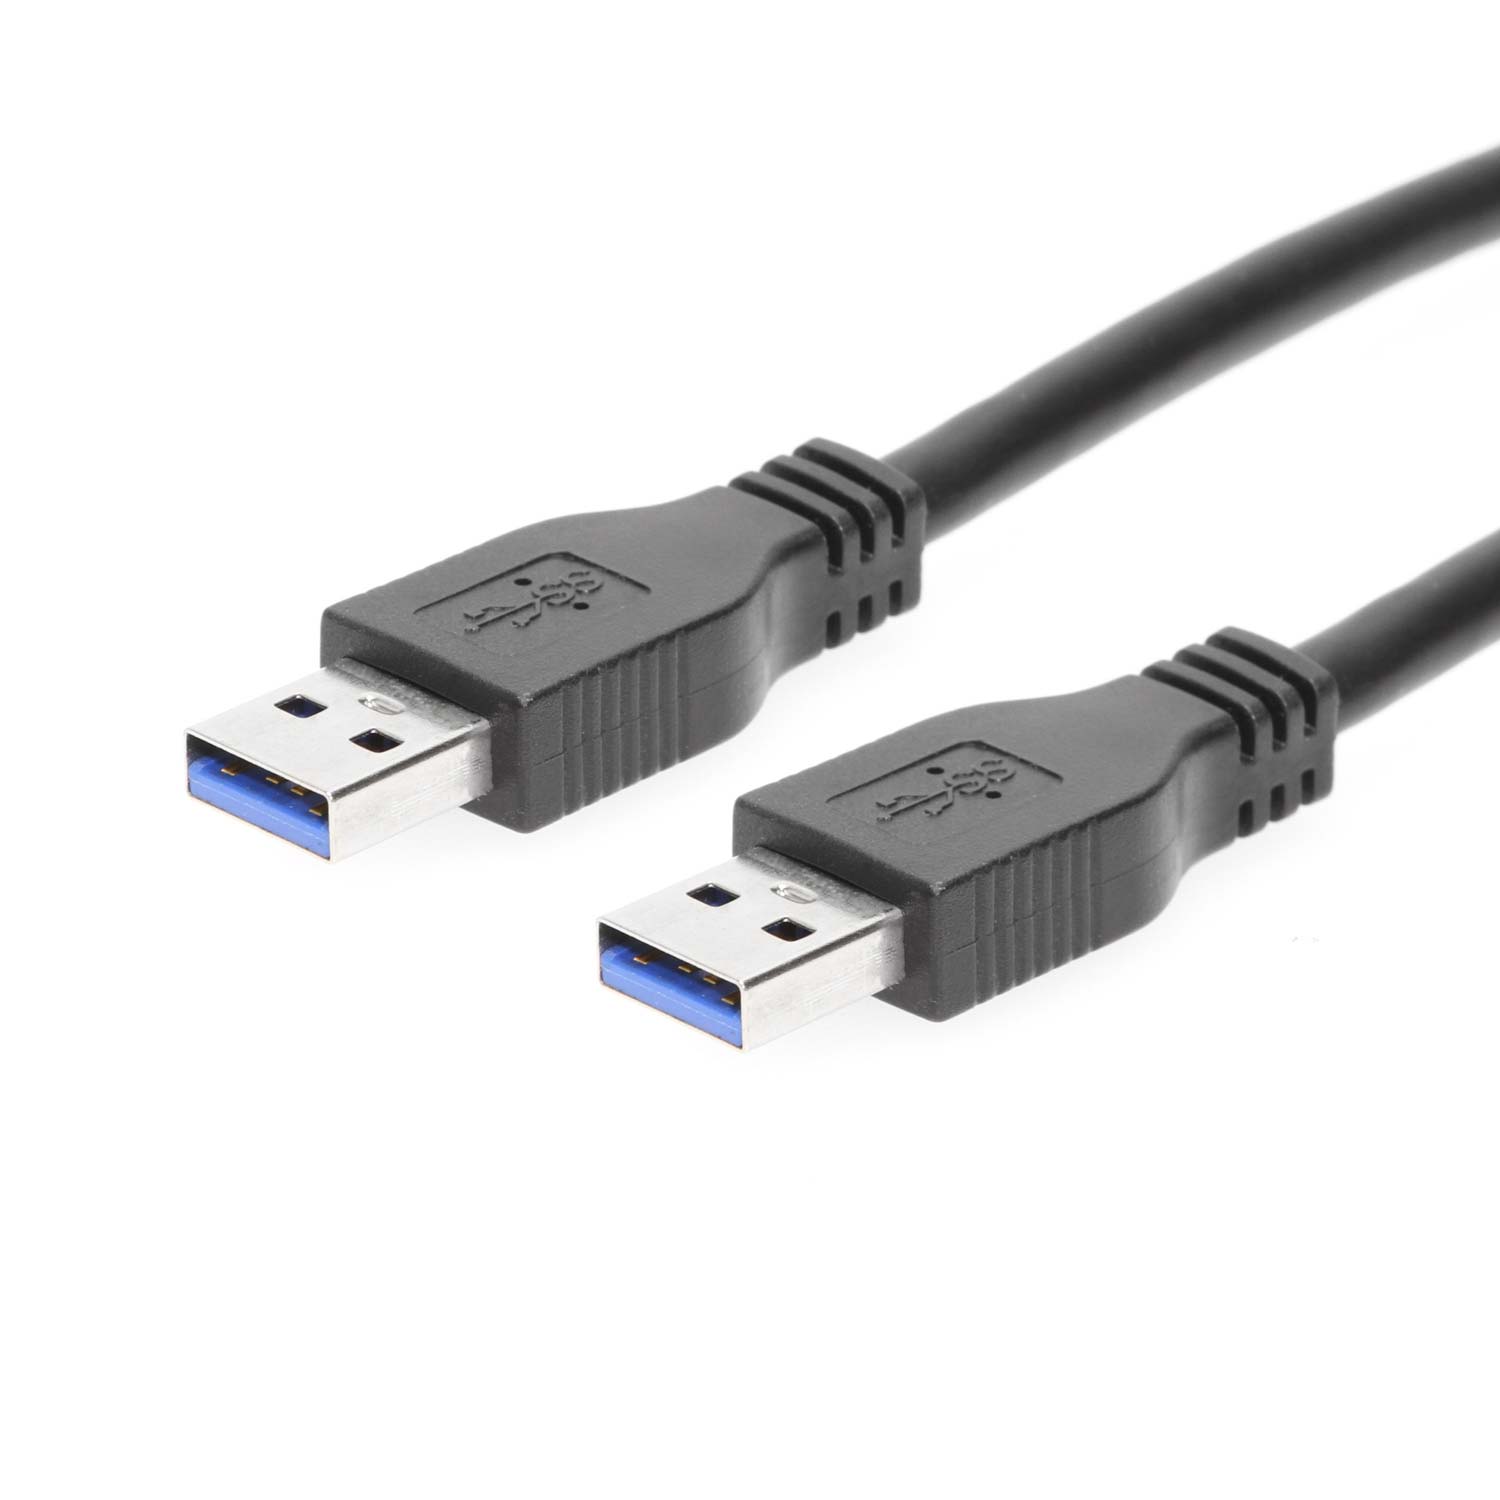 1ft USB 3.2 Gen 1 Type-A to Male Super-Speed Device Cable